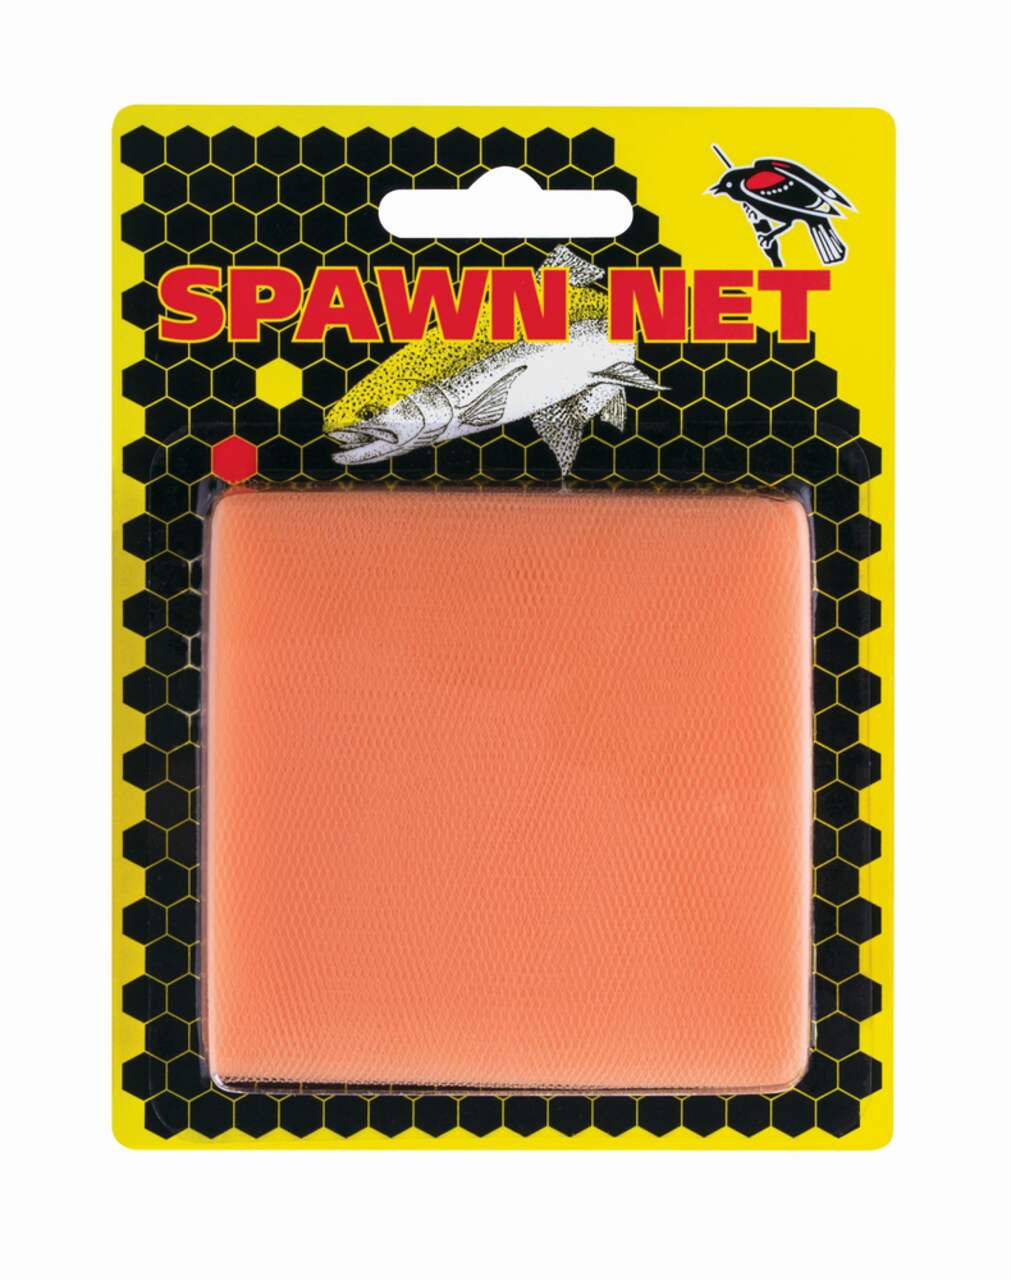 https://media-www.canadiantire.ca/product/playing/fishing/fishing-lures/0780108/blackbird-spawn-net-honeycomb-peach-45ffd78e-e9e1-493b-b9fe-6b2e6cf41f88.png?imdensity=1&imwidth=640&impolicy=mZoom